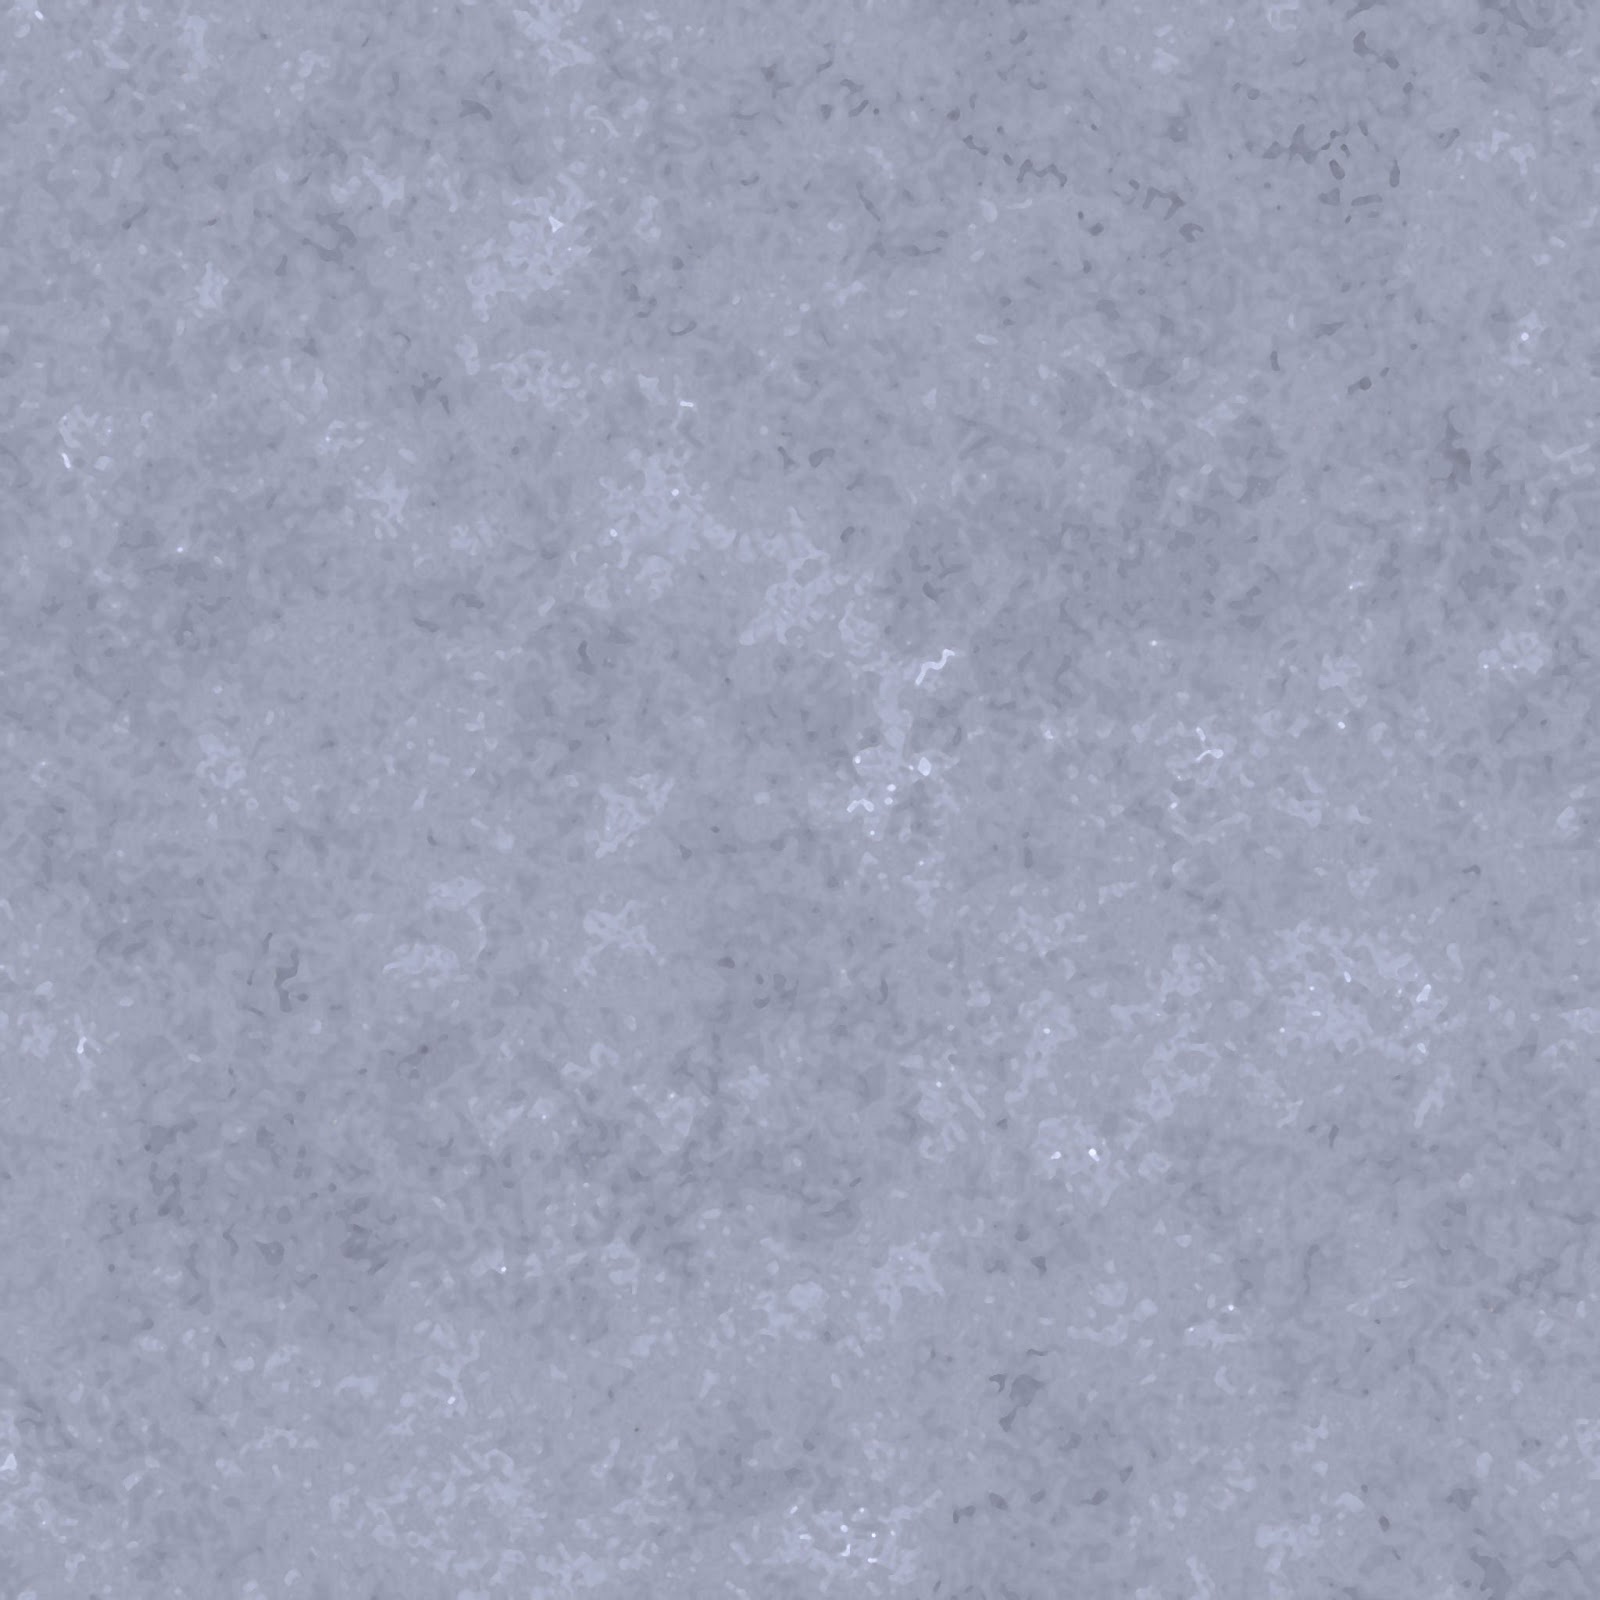 Smooth_metal_plate_texture_seamless_tileable